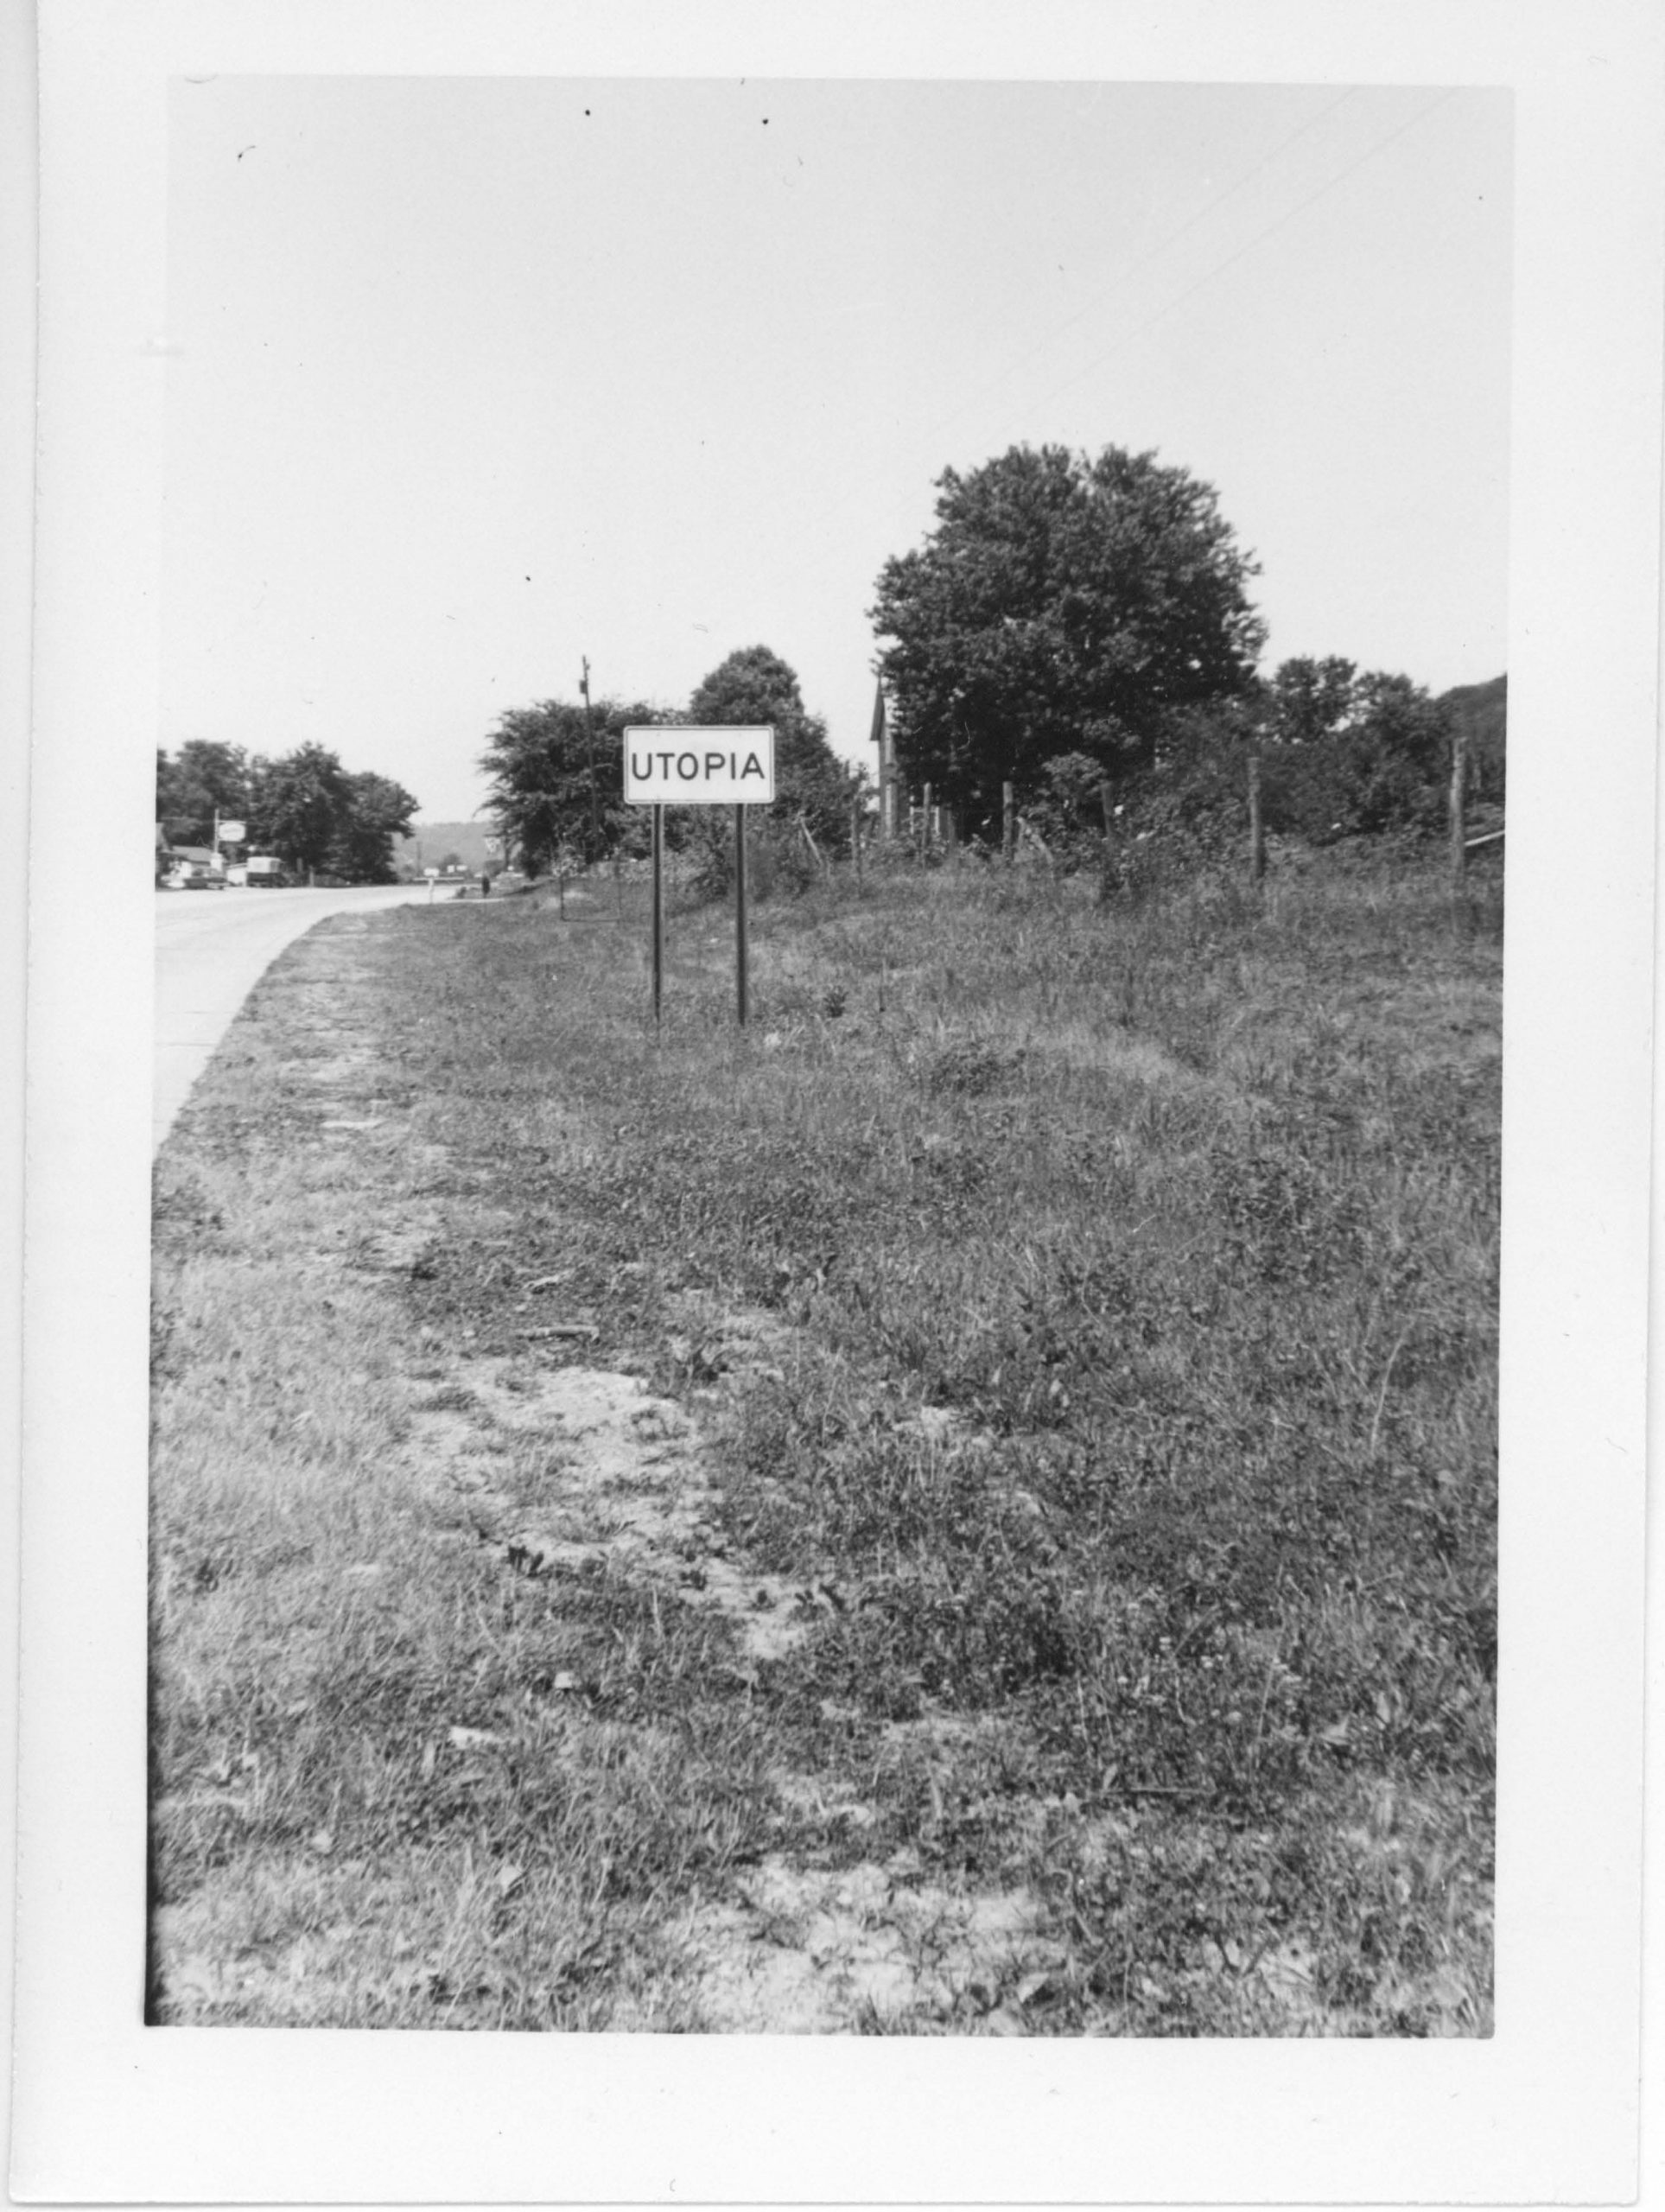 Black and white photograph of a side of a road, with grass, and a single sign reading "UTOPIA." Trees in background.